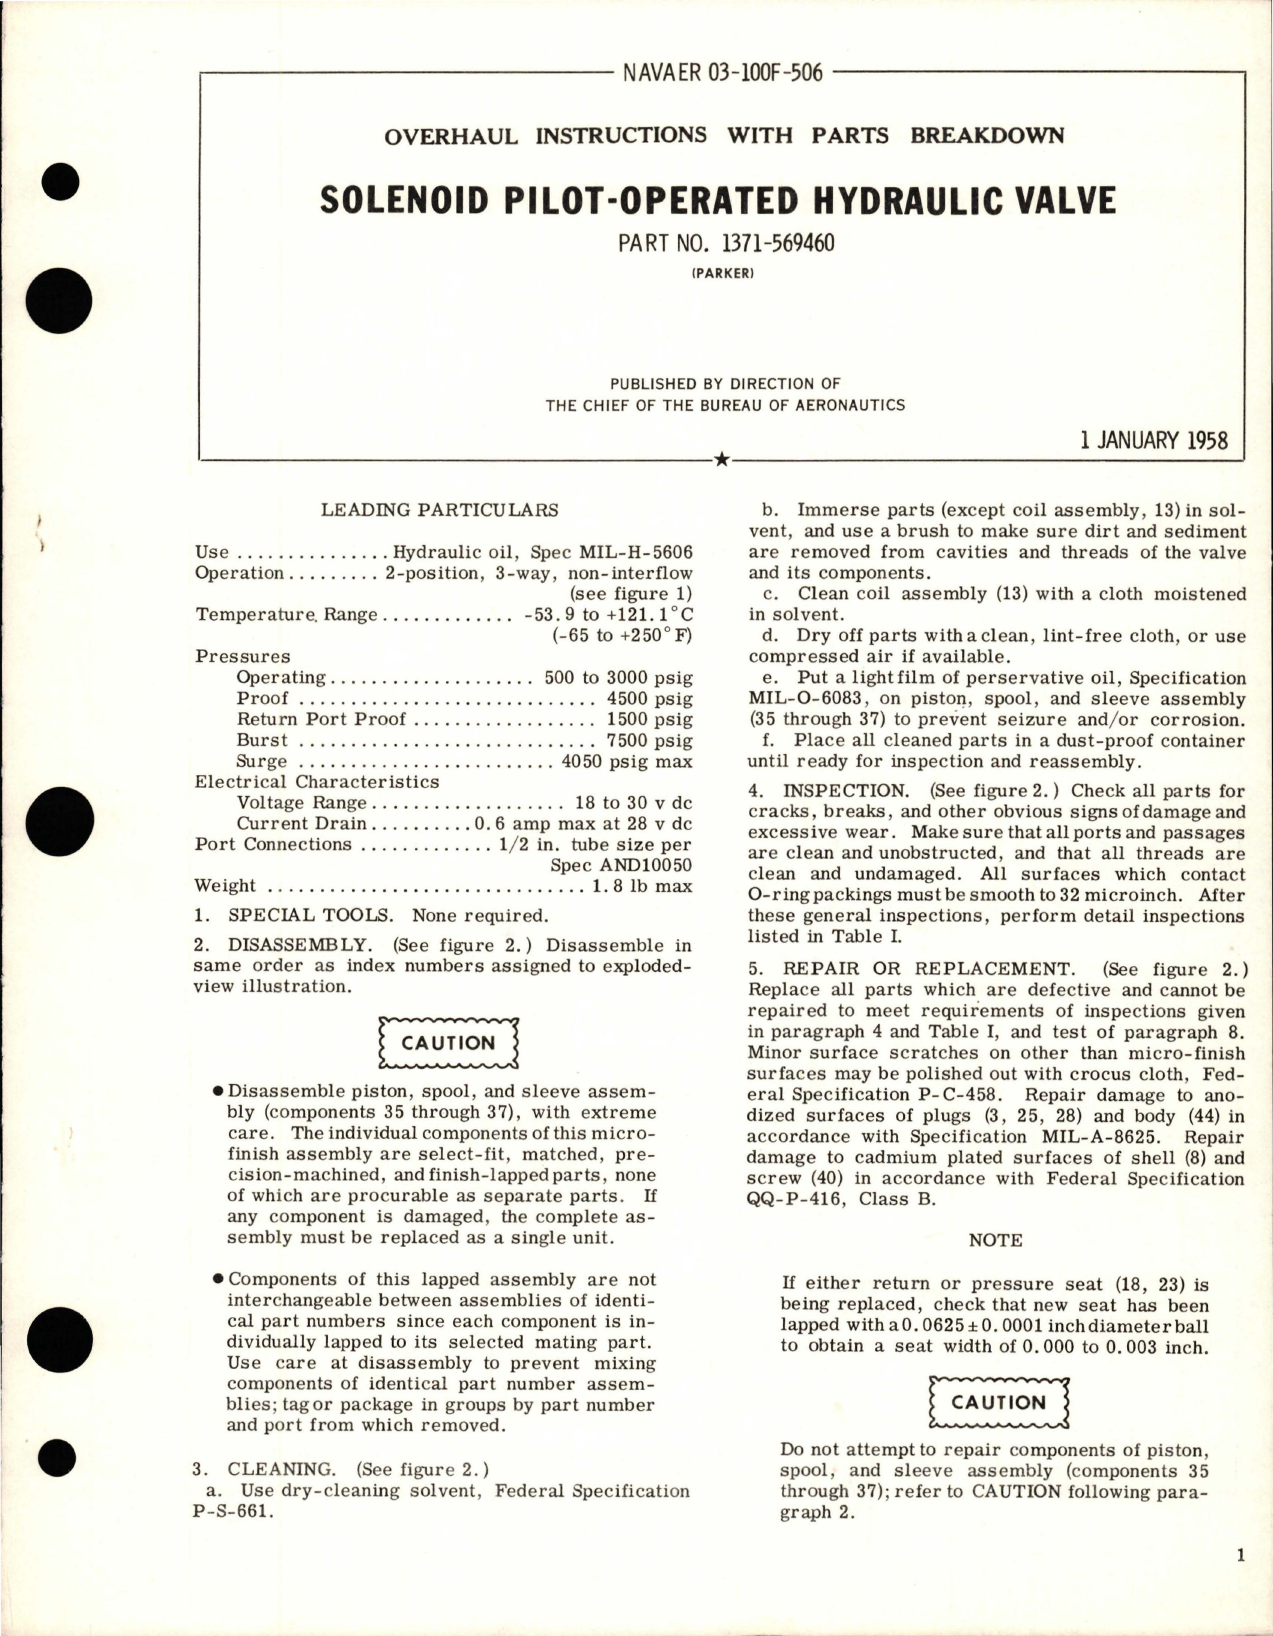 Sample page 1 from AirCorps Library document: Overhaul Instructions with Parts Breakdown for Solenoid Pilot-Operated Hydraulic Valve - Part 1371-569460